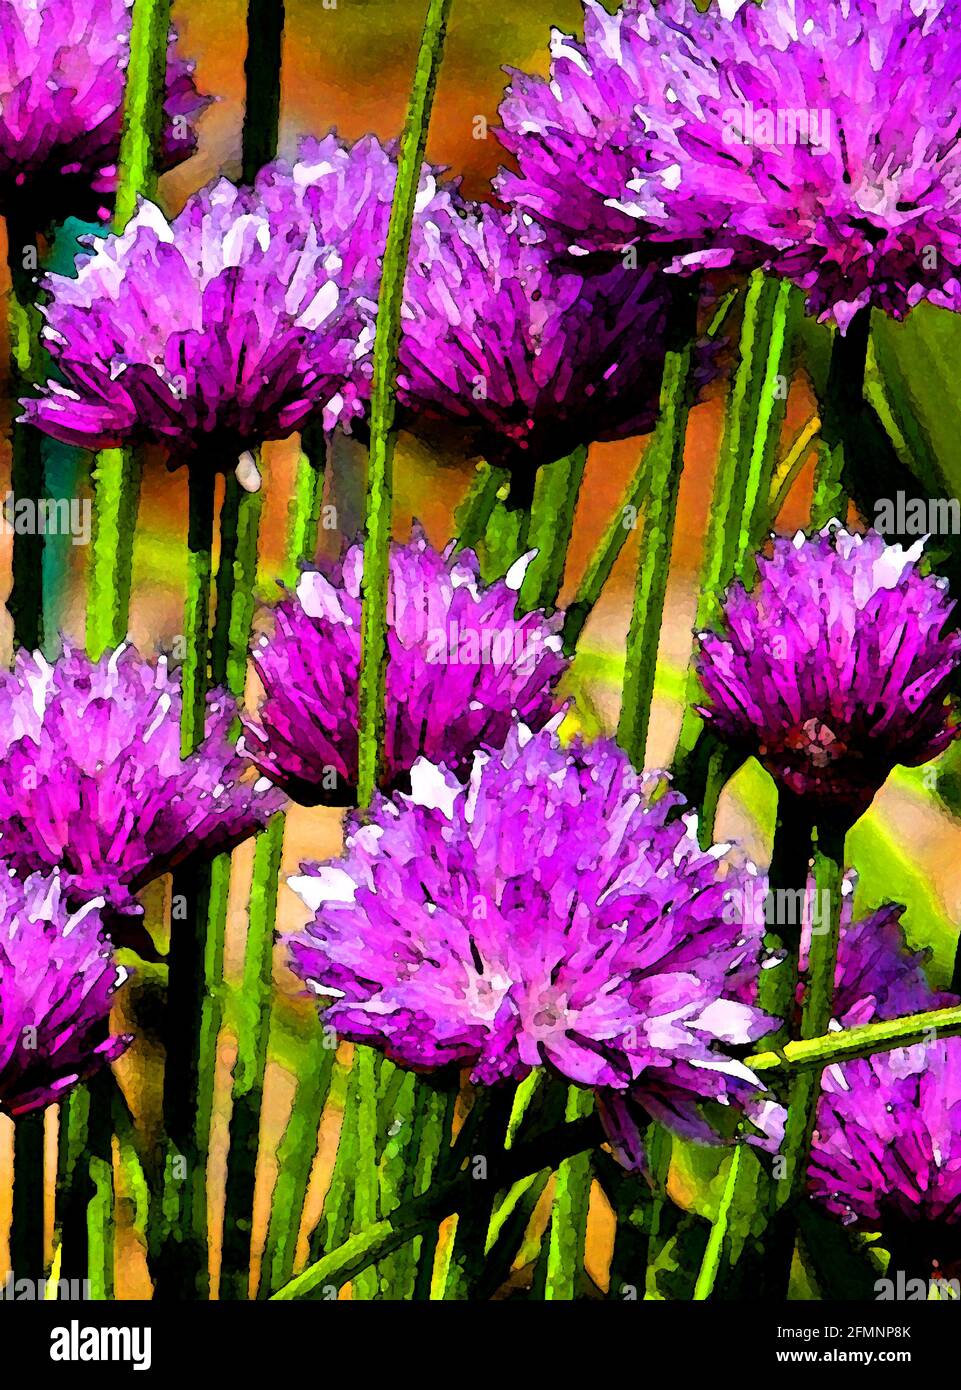 Chives (Allium schoenoprasum) One of Forty-two Iconic Images of English Garden Flowers, Wildflowers and Rural Landscapes. Stock Photo